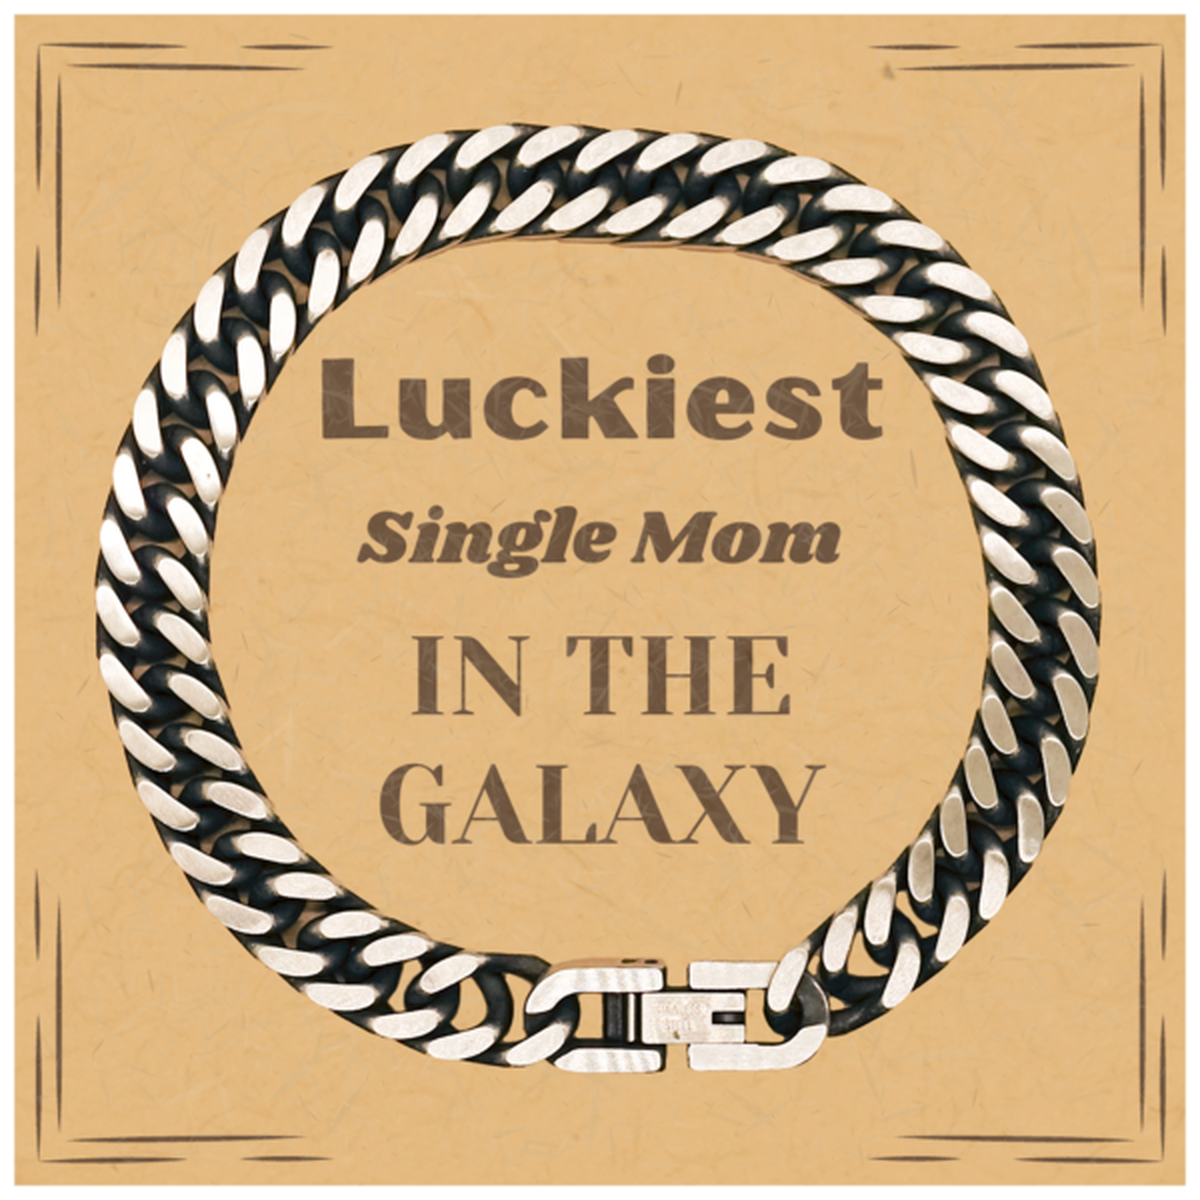 Luckiest Single Mom in the Galaxy, To My Single Mom Message Card Gifts, Christmas Single Mom Cuban Link Chain Bracelet Gifts, X-mas Birthday Unique Gifts For Single Mom Men Women